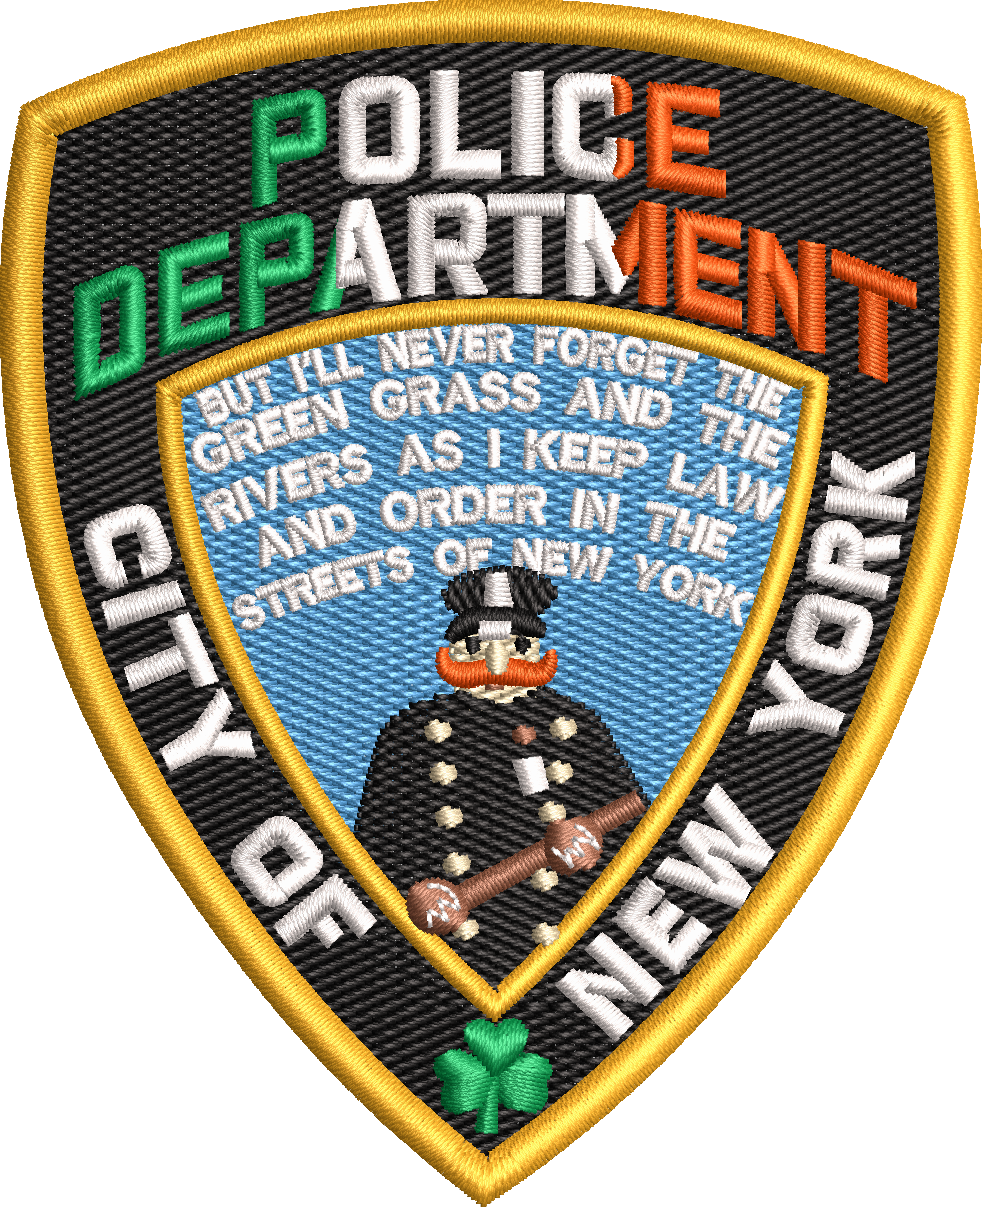 Police Department - City of New York